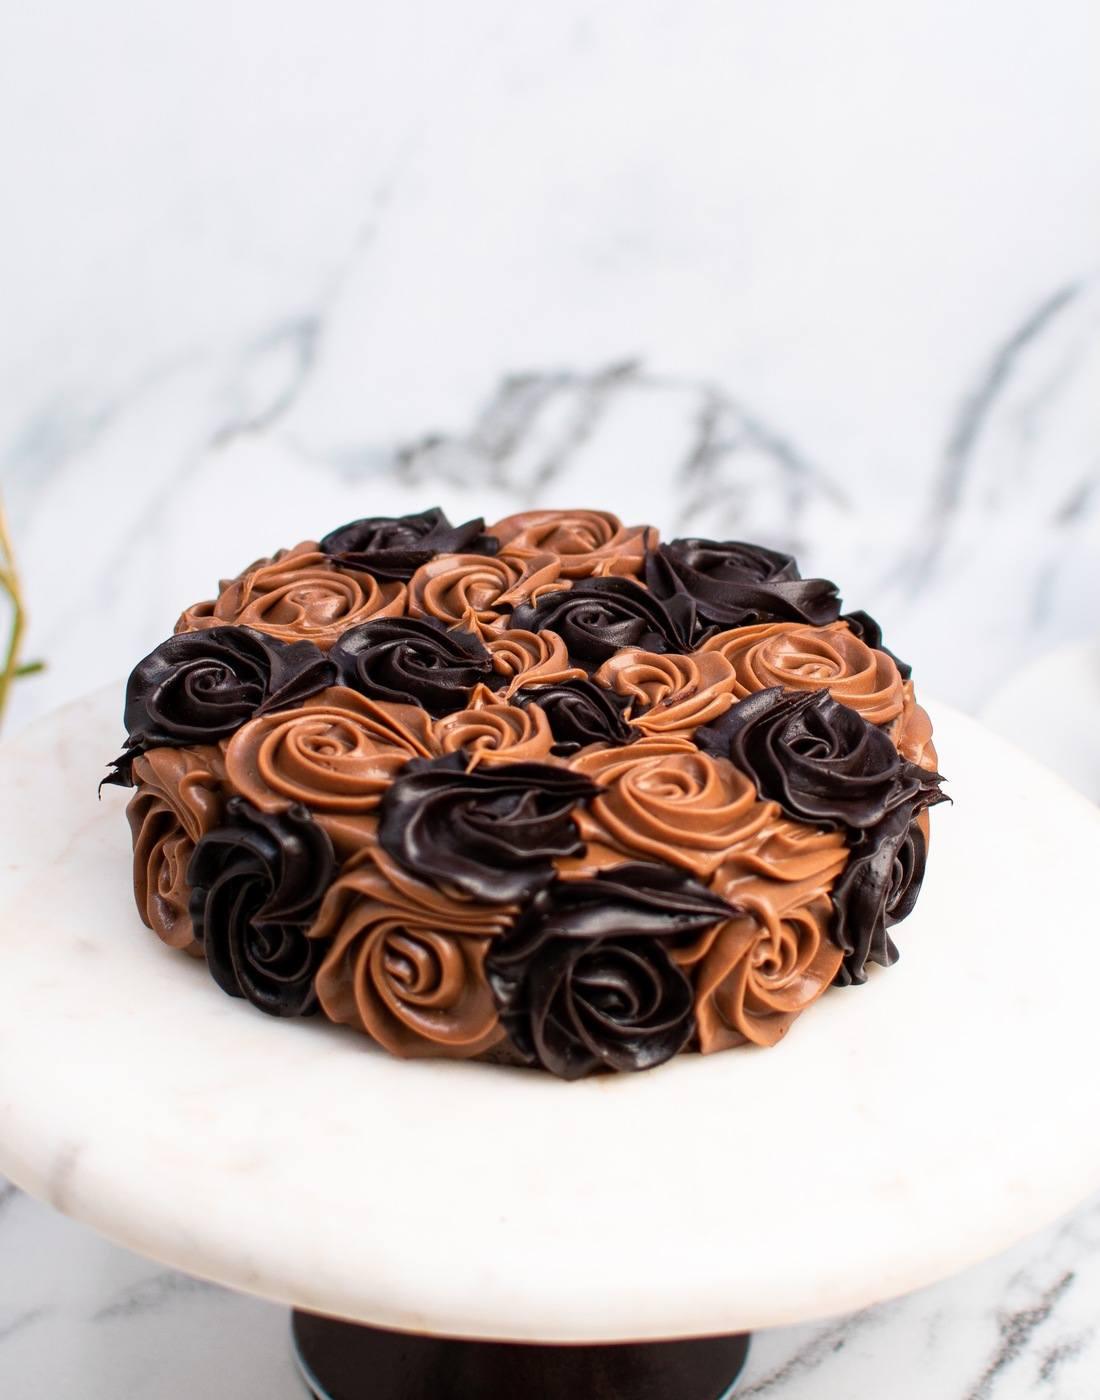 Online Cake Delivery in Delhi Upto Rs.350 OFF | Order Now Winni